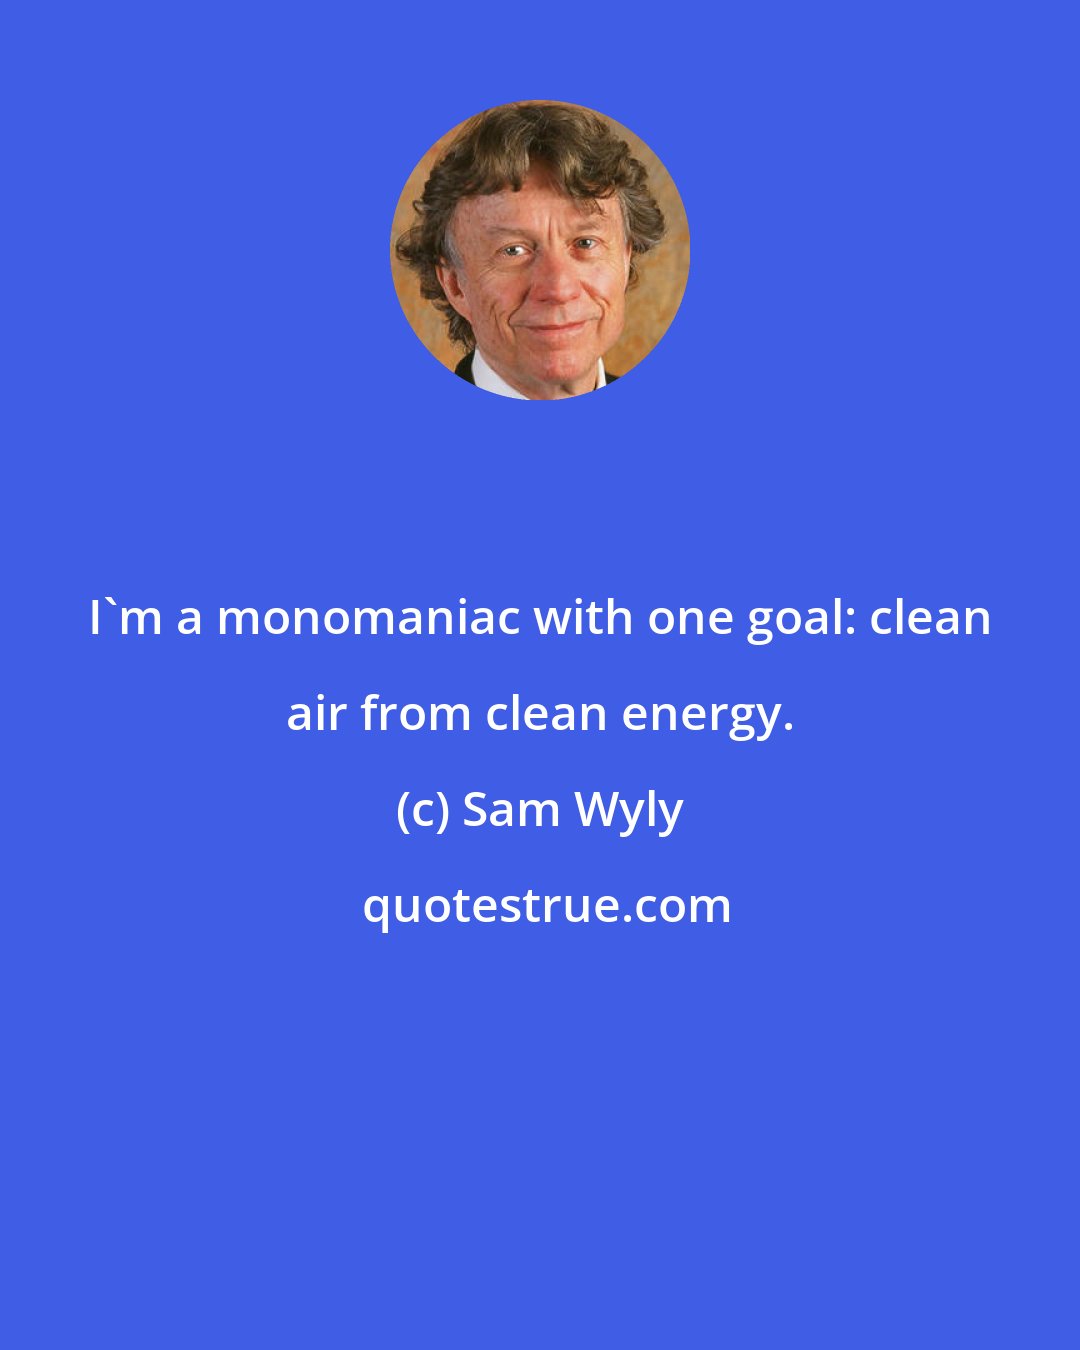 Sam Wyly: I'm a monomaniac with one goal: clean air from clean energy.